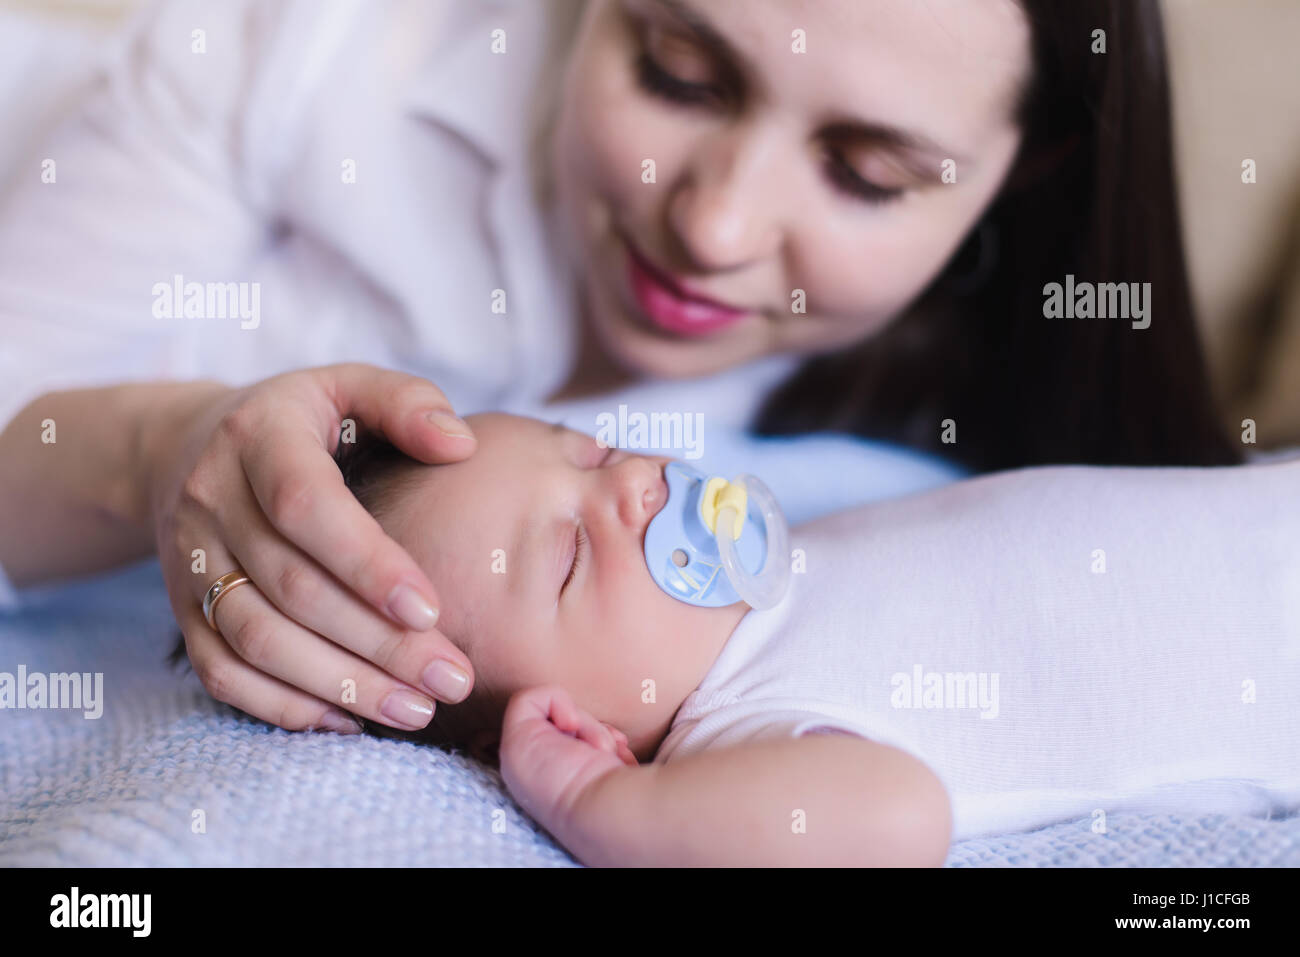 Newborn baby boy with mother. Mom gently stroking the babys head. Baby sweet sleeping on a white bed. Child with a pacifier in his mouth. Stock Photo